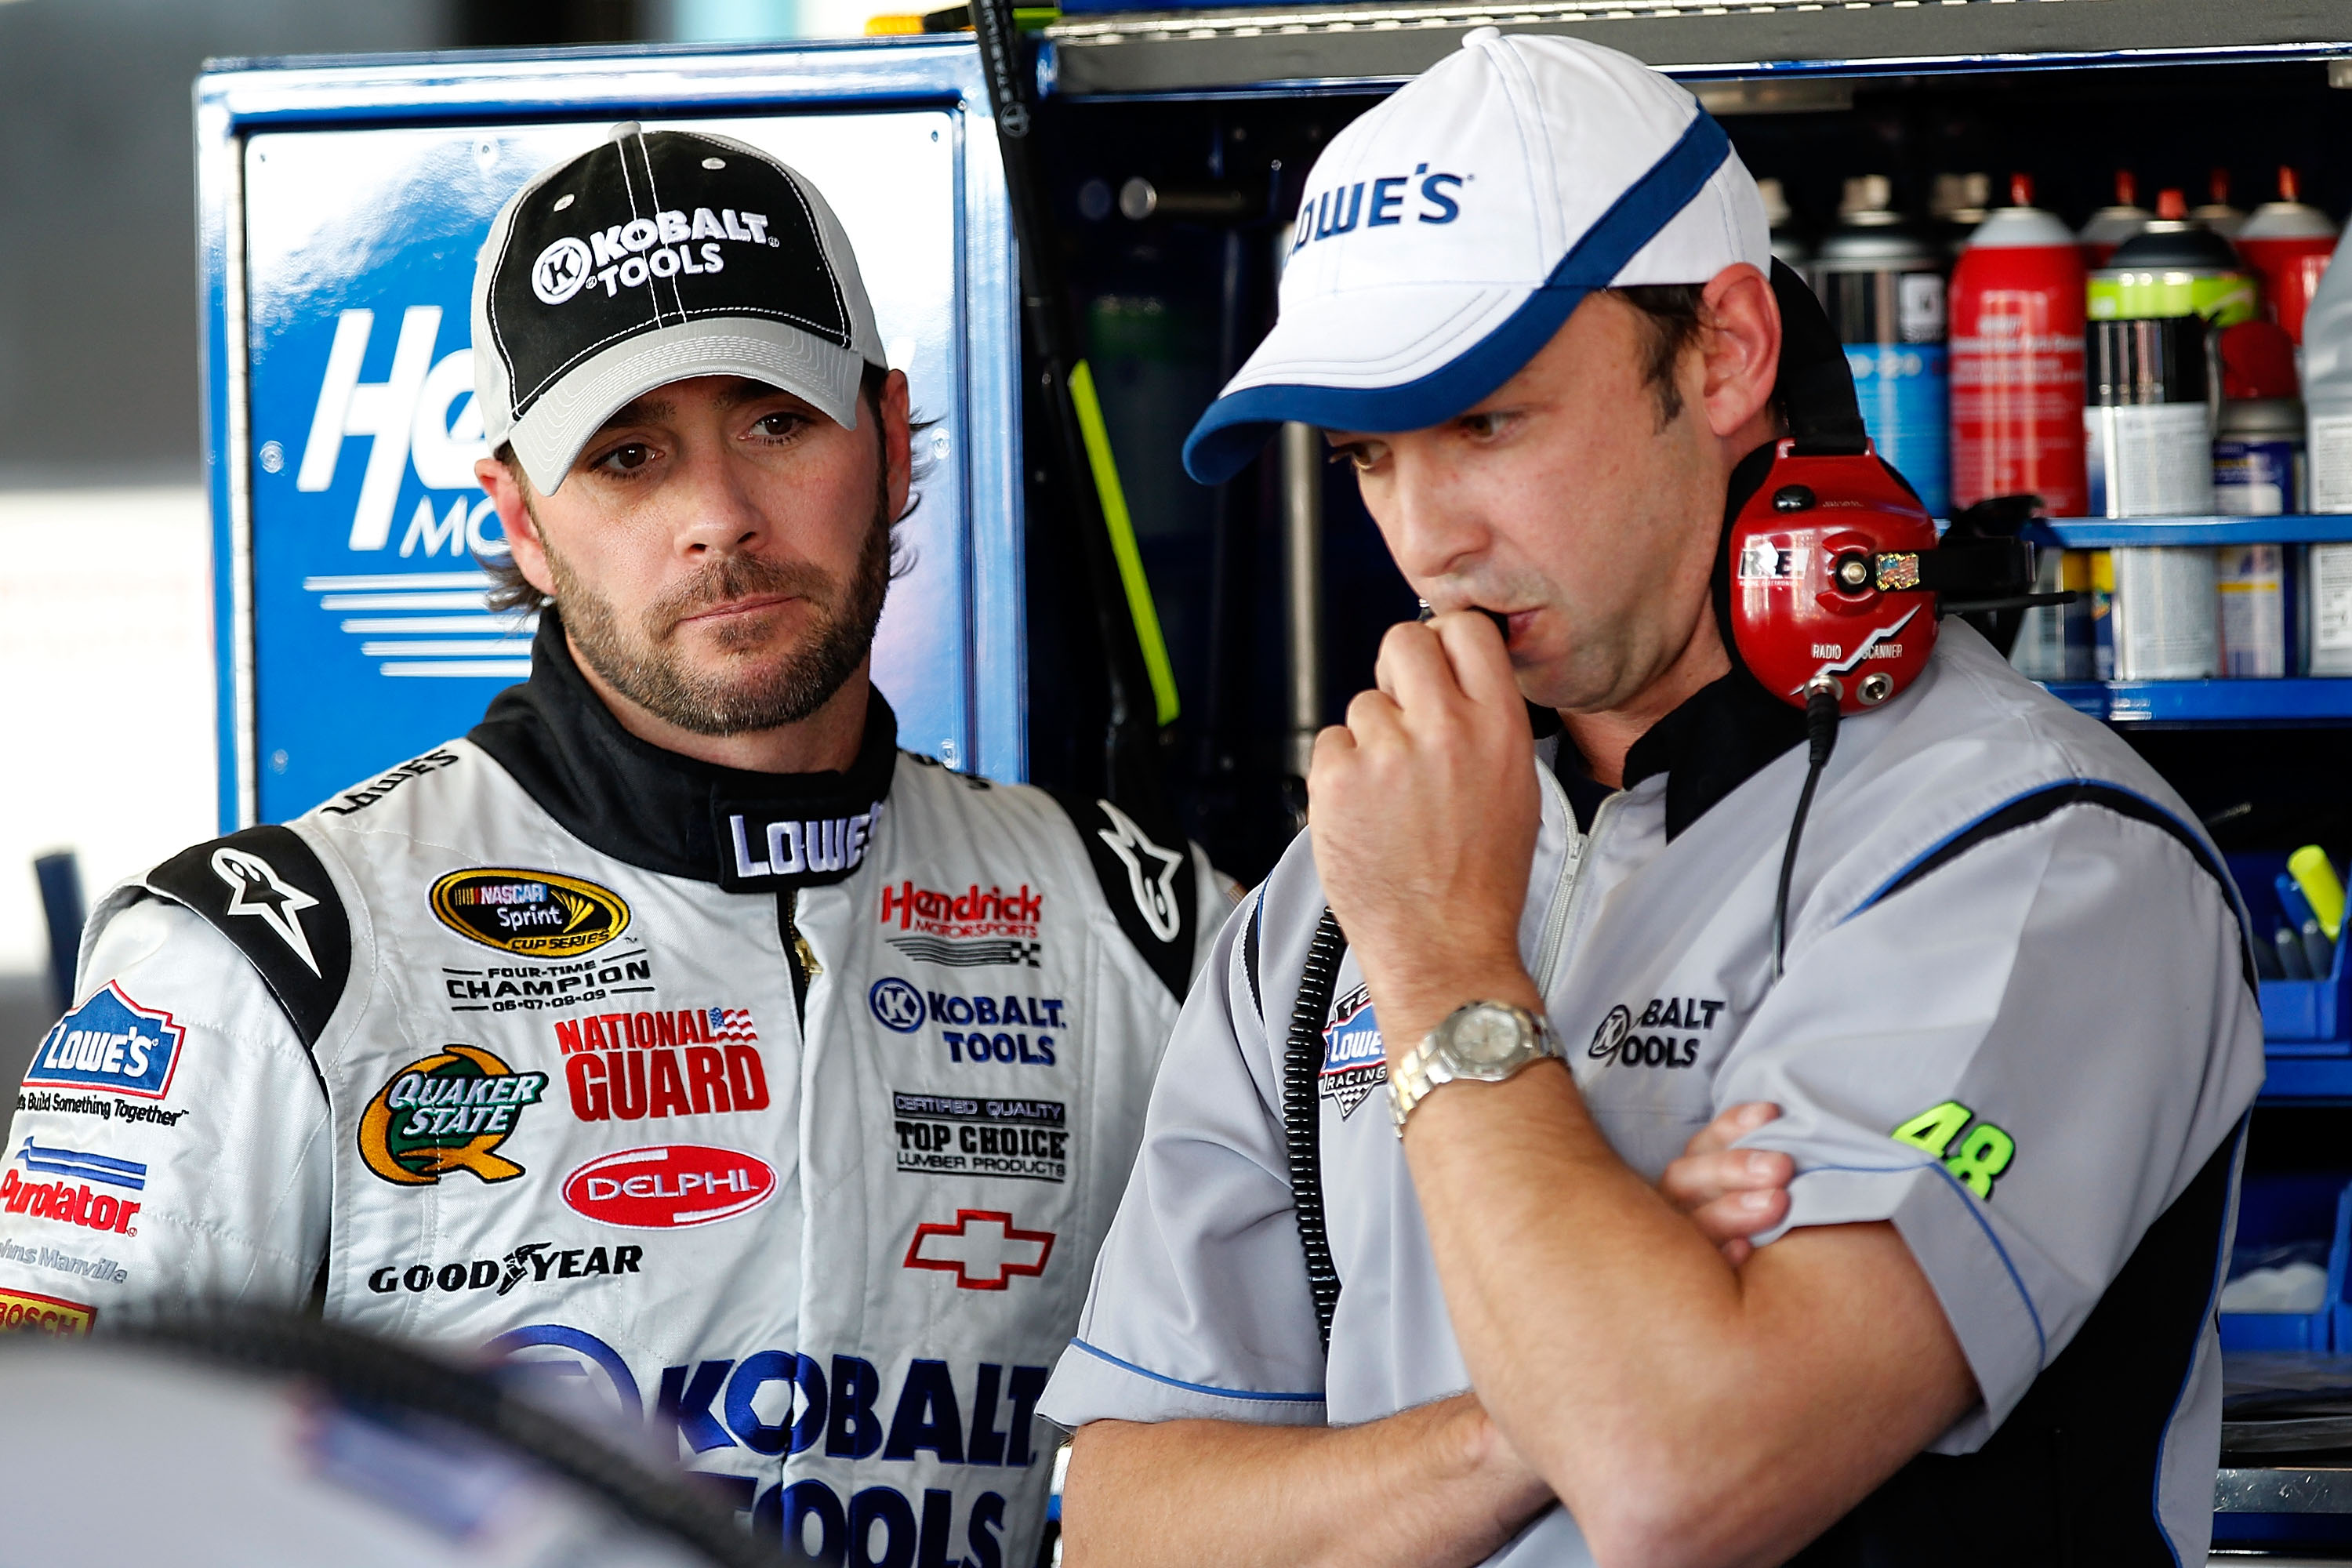 AVONDALE, AZ - NOVEMBER 12:  (L-R) Jimmie Johnson, driver of the #48 Lowe's Chevrolet, stands in the garage with his crew chief, Chad Knaus during practice for the NASCAR Sprint Cup Series Kobalt Tools 500 at Phoenix International Raceway on November 12,